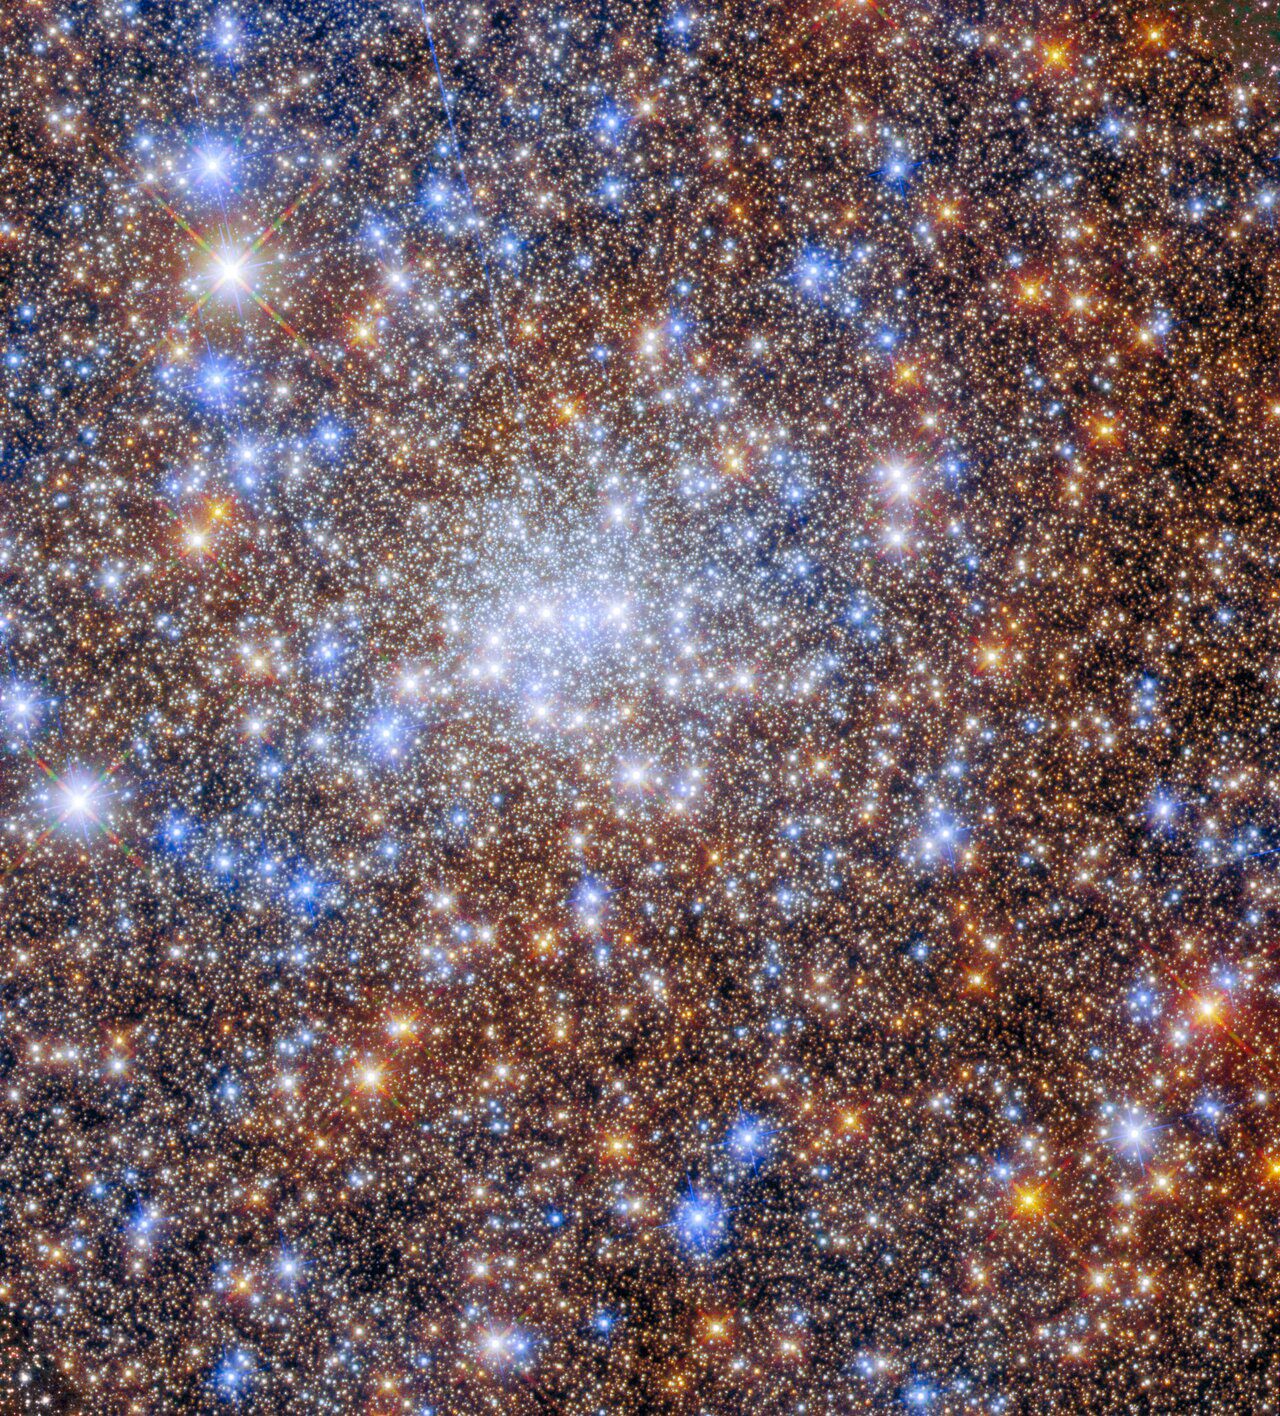 Astronomers took advantage of the sensitivity of two of Hubble's instruments, the Advanced Camera for Surveys and the Wide Field Camera 3 to capture this remarkable image.